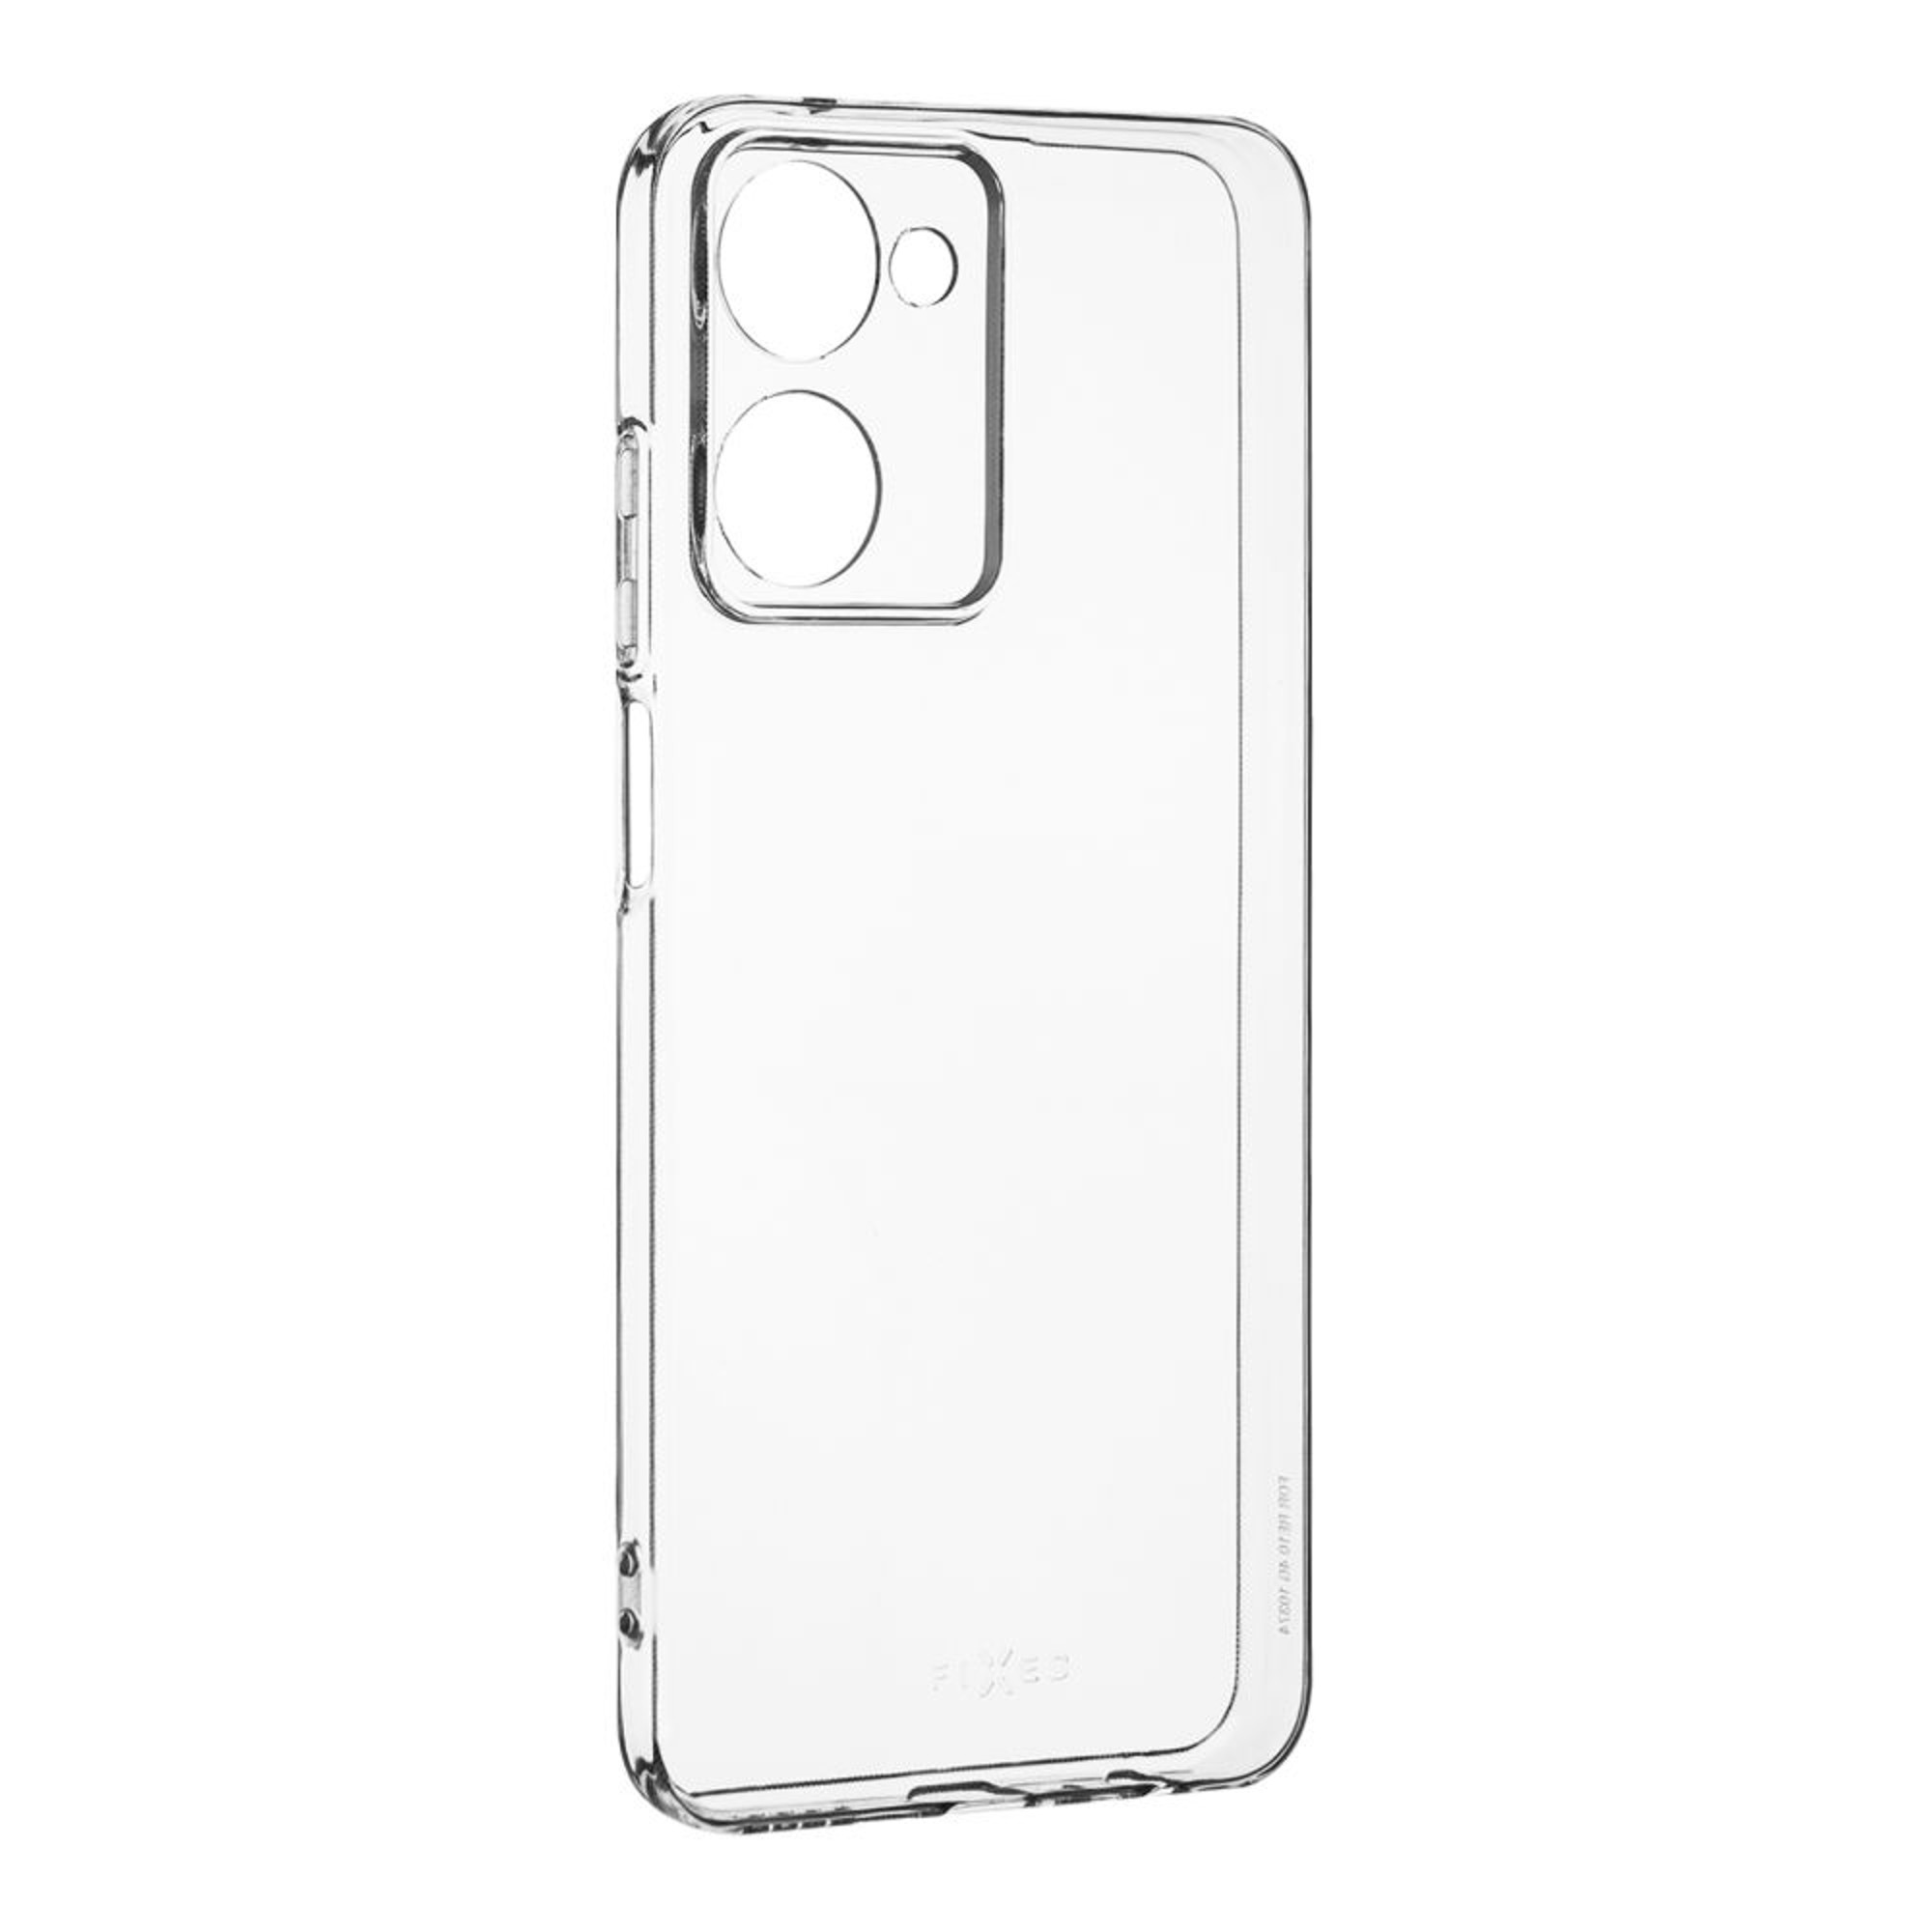 Gel-Hülle, TPU FIXED Backcover, 10, Realme, Transparent